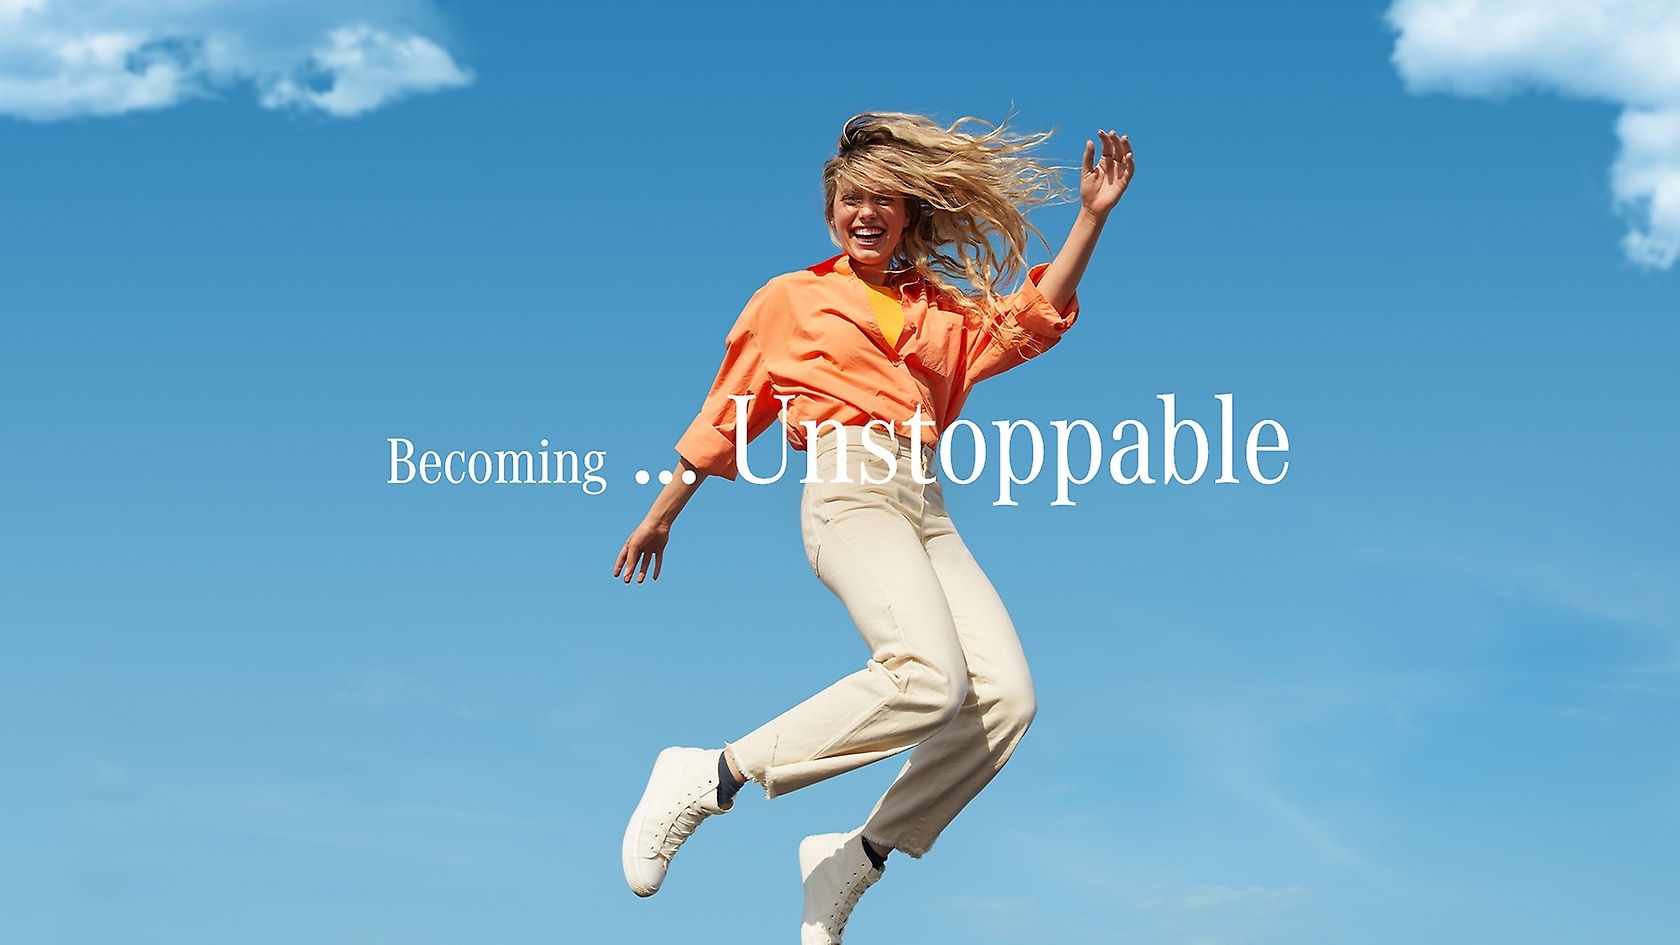 Becoming... Unstoppable